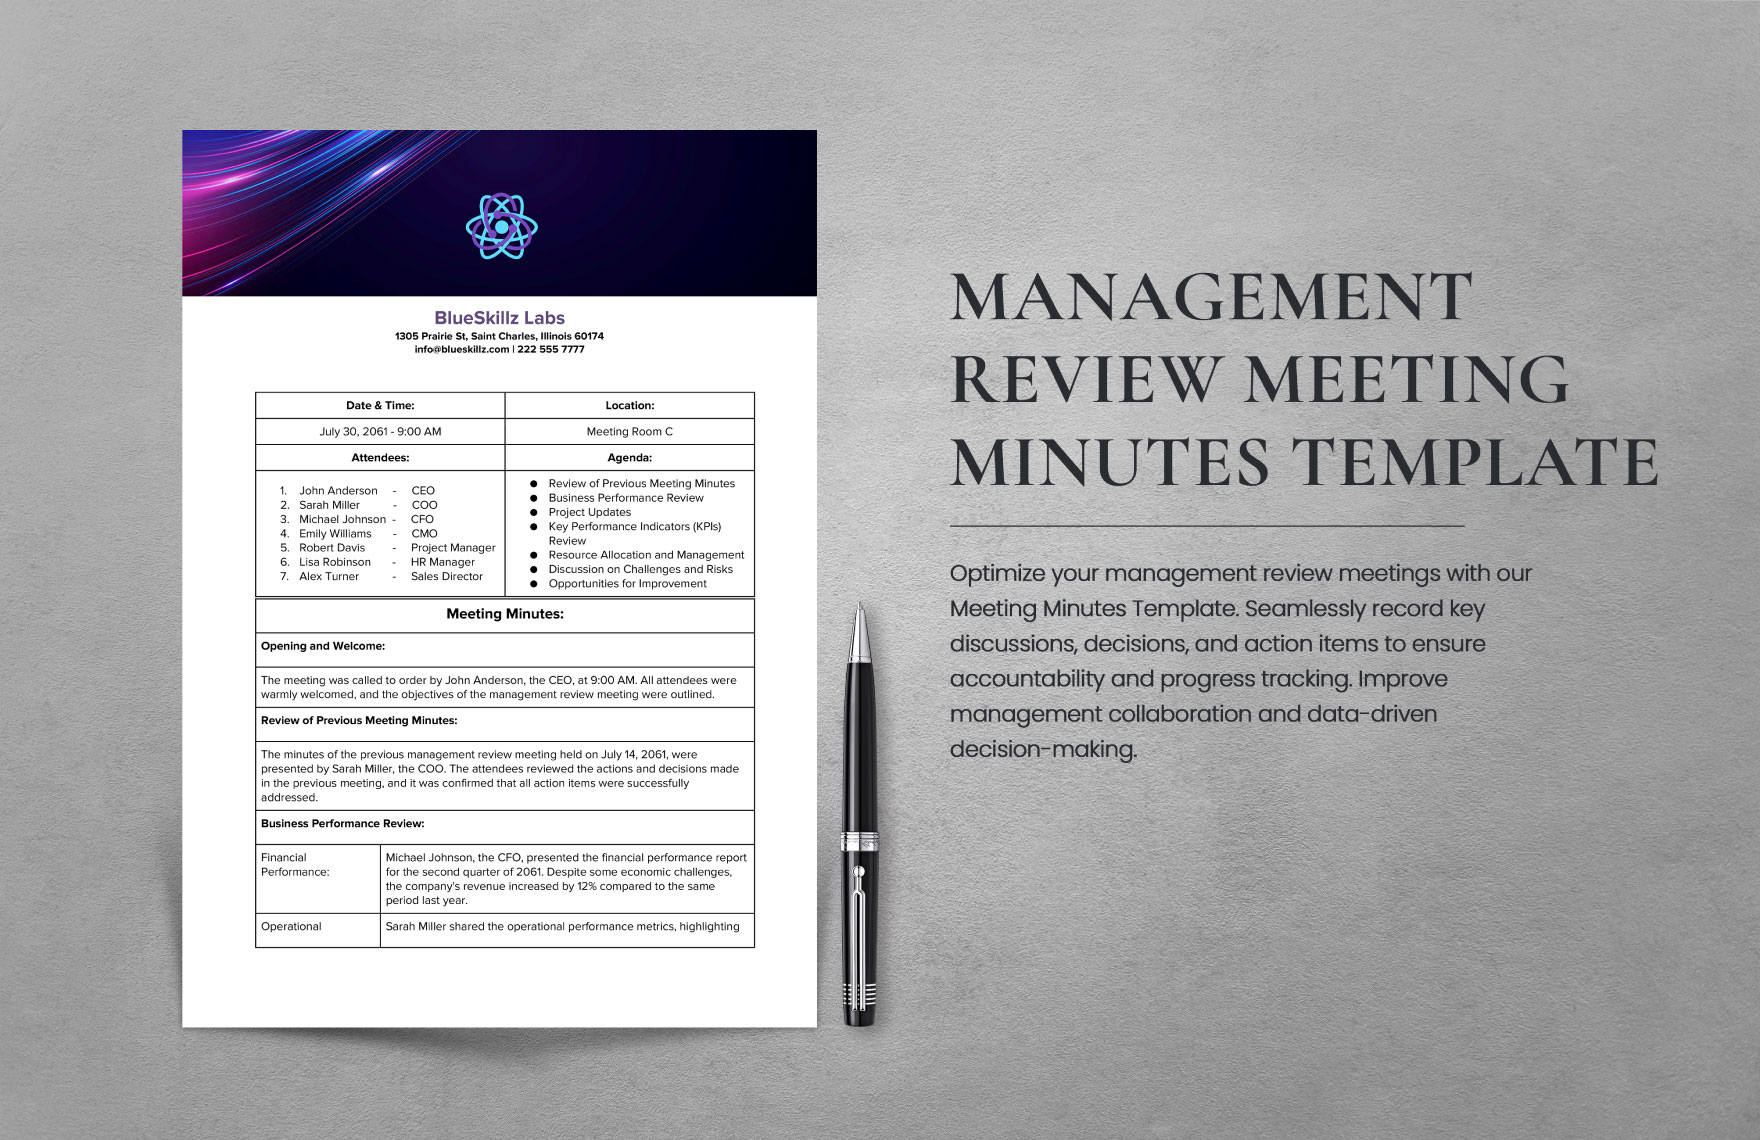 management review meting minutes